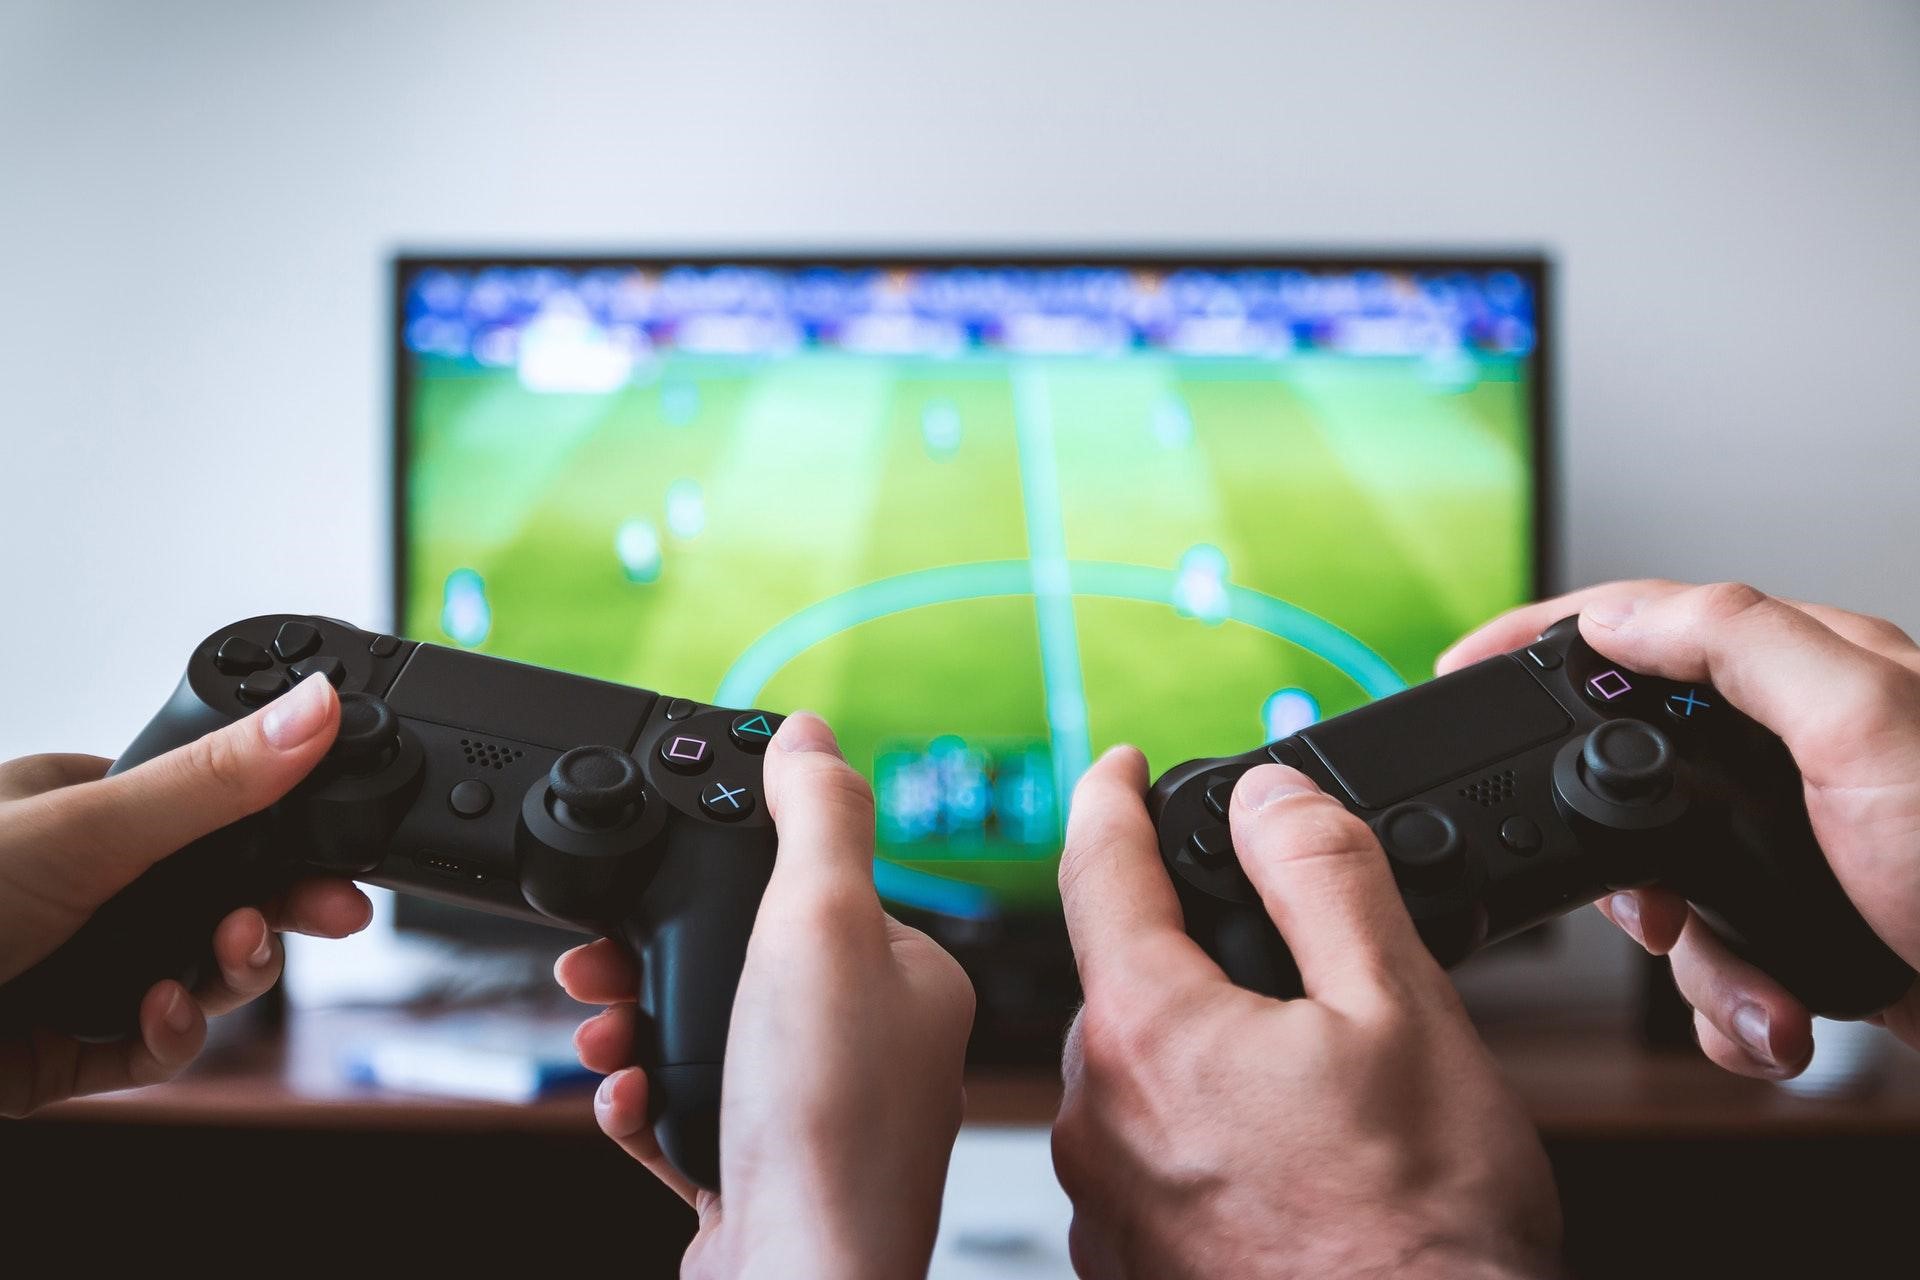 Weekend Reading: How Online Gaming Can Positively Affect Future Generations  - Take It Personel-ly